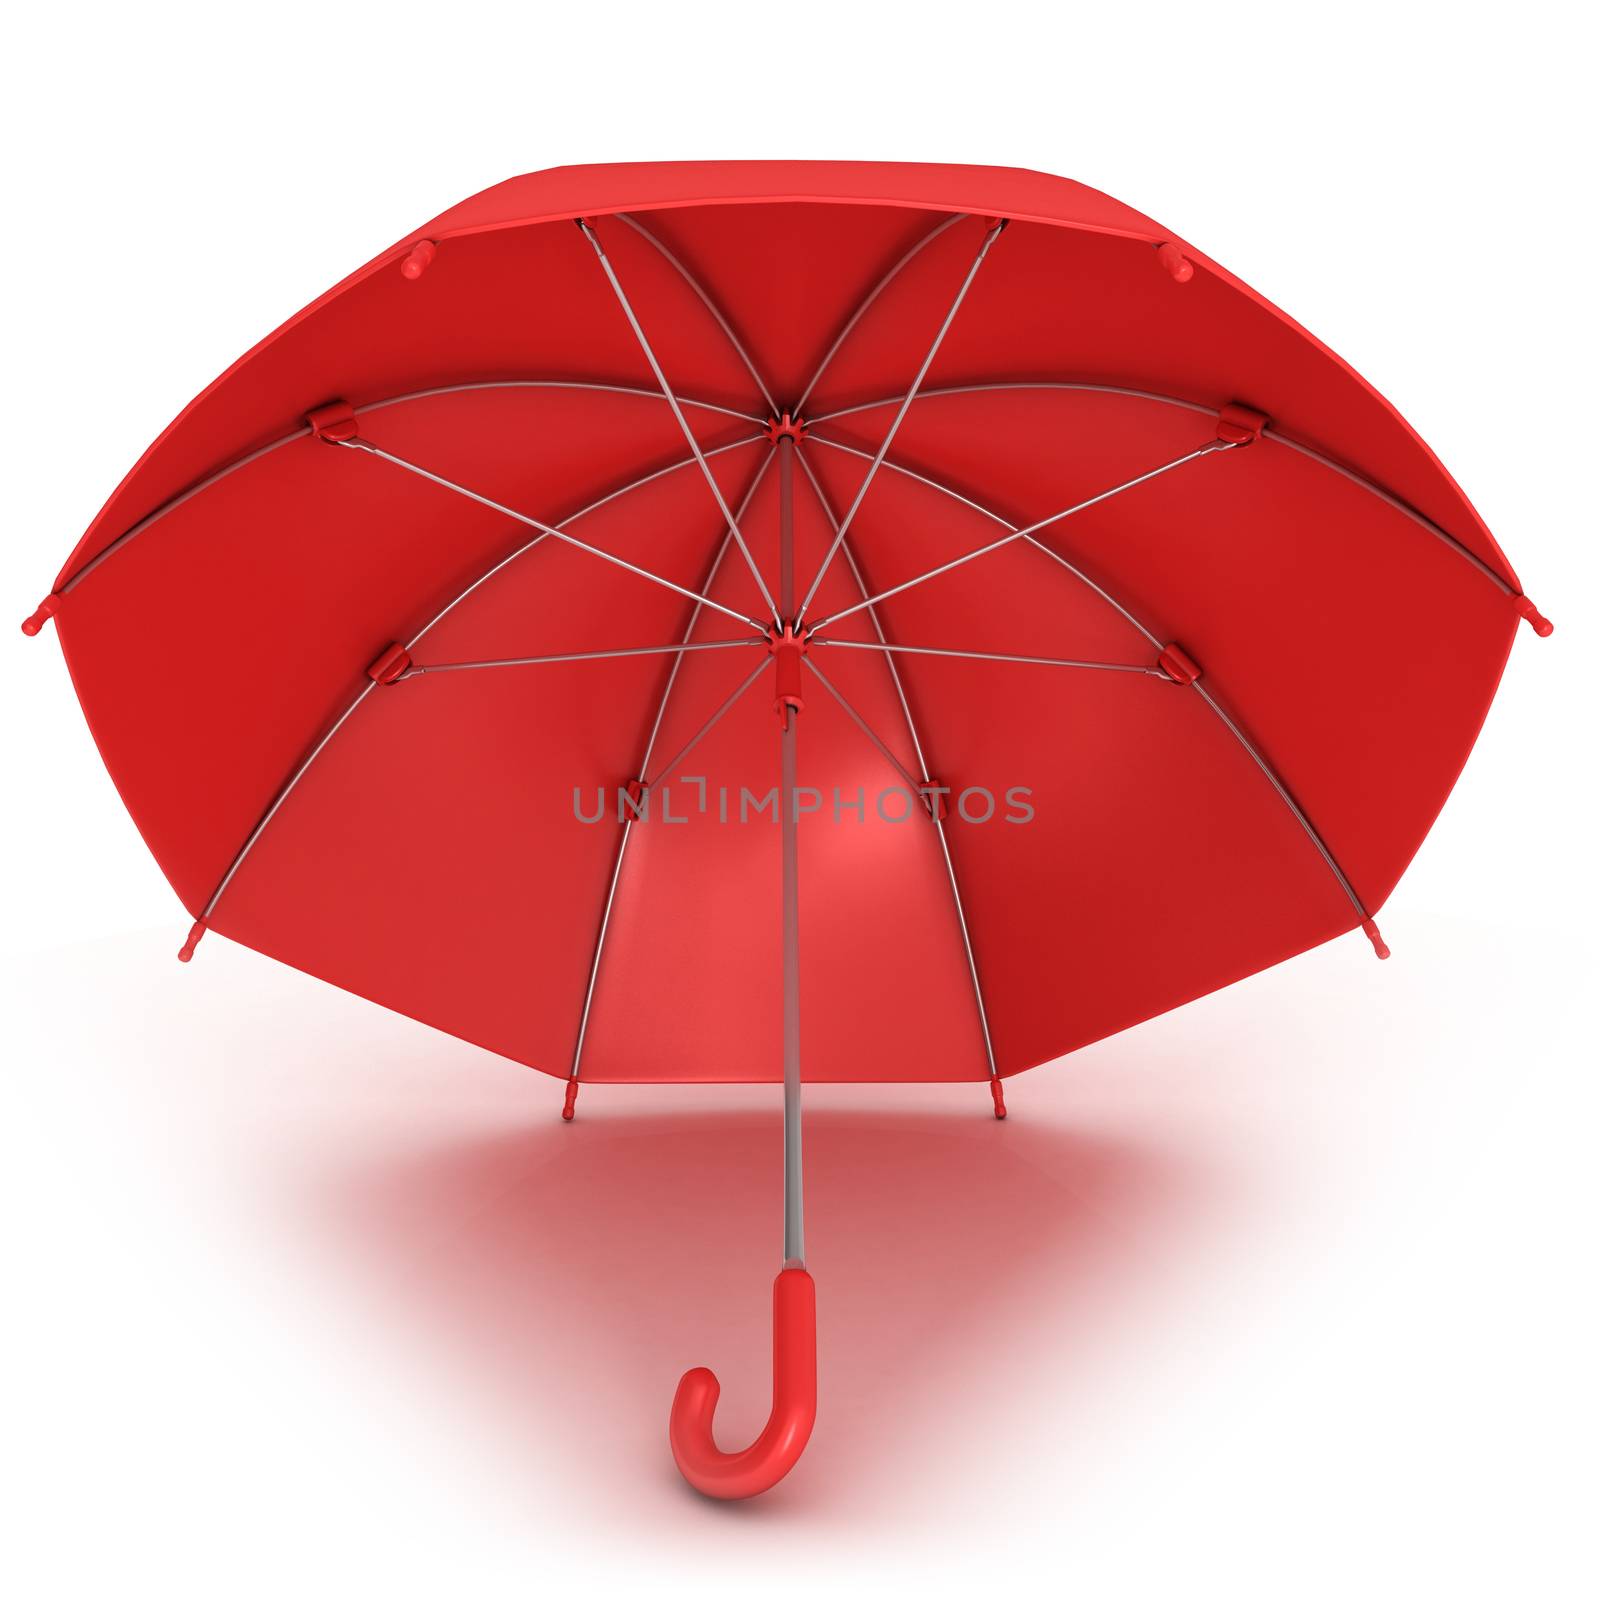 Red umbrella 3D isolated on white background, front view